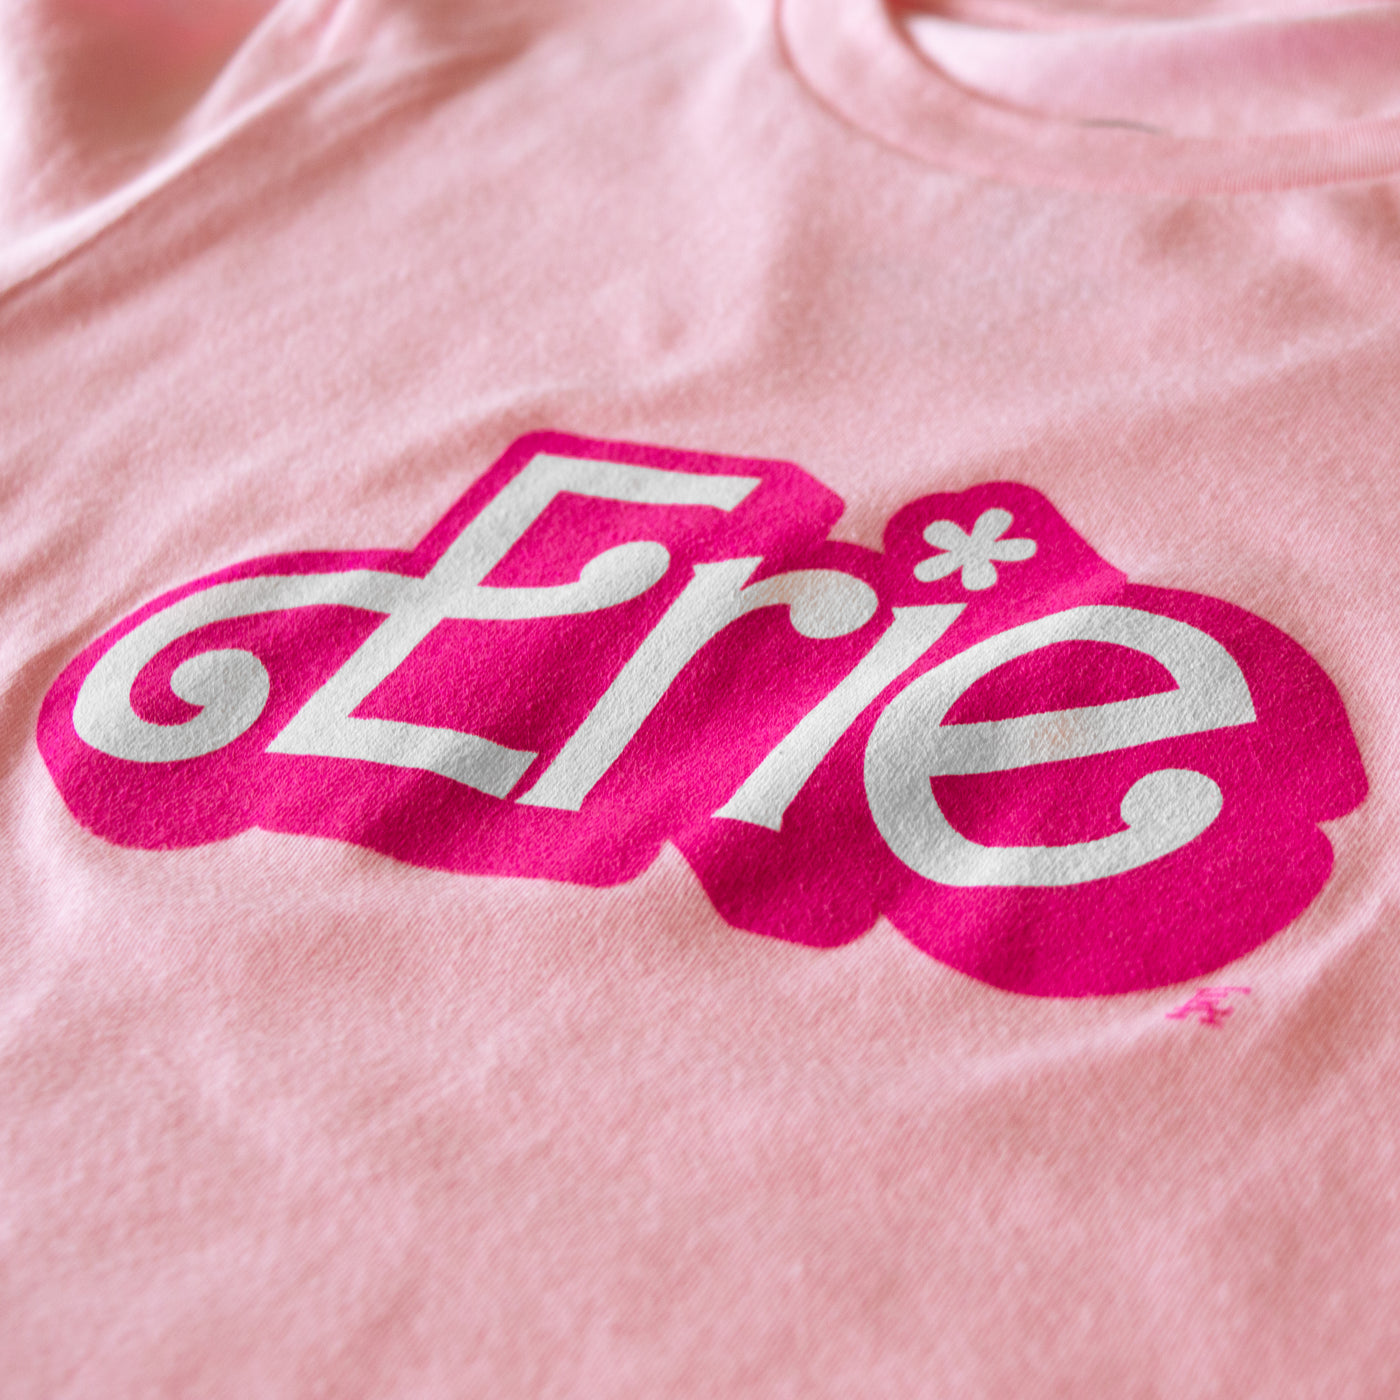 Erie Doll Youth Tee